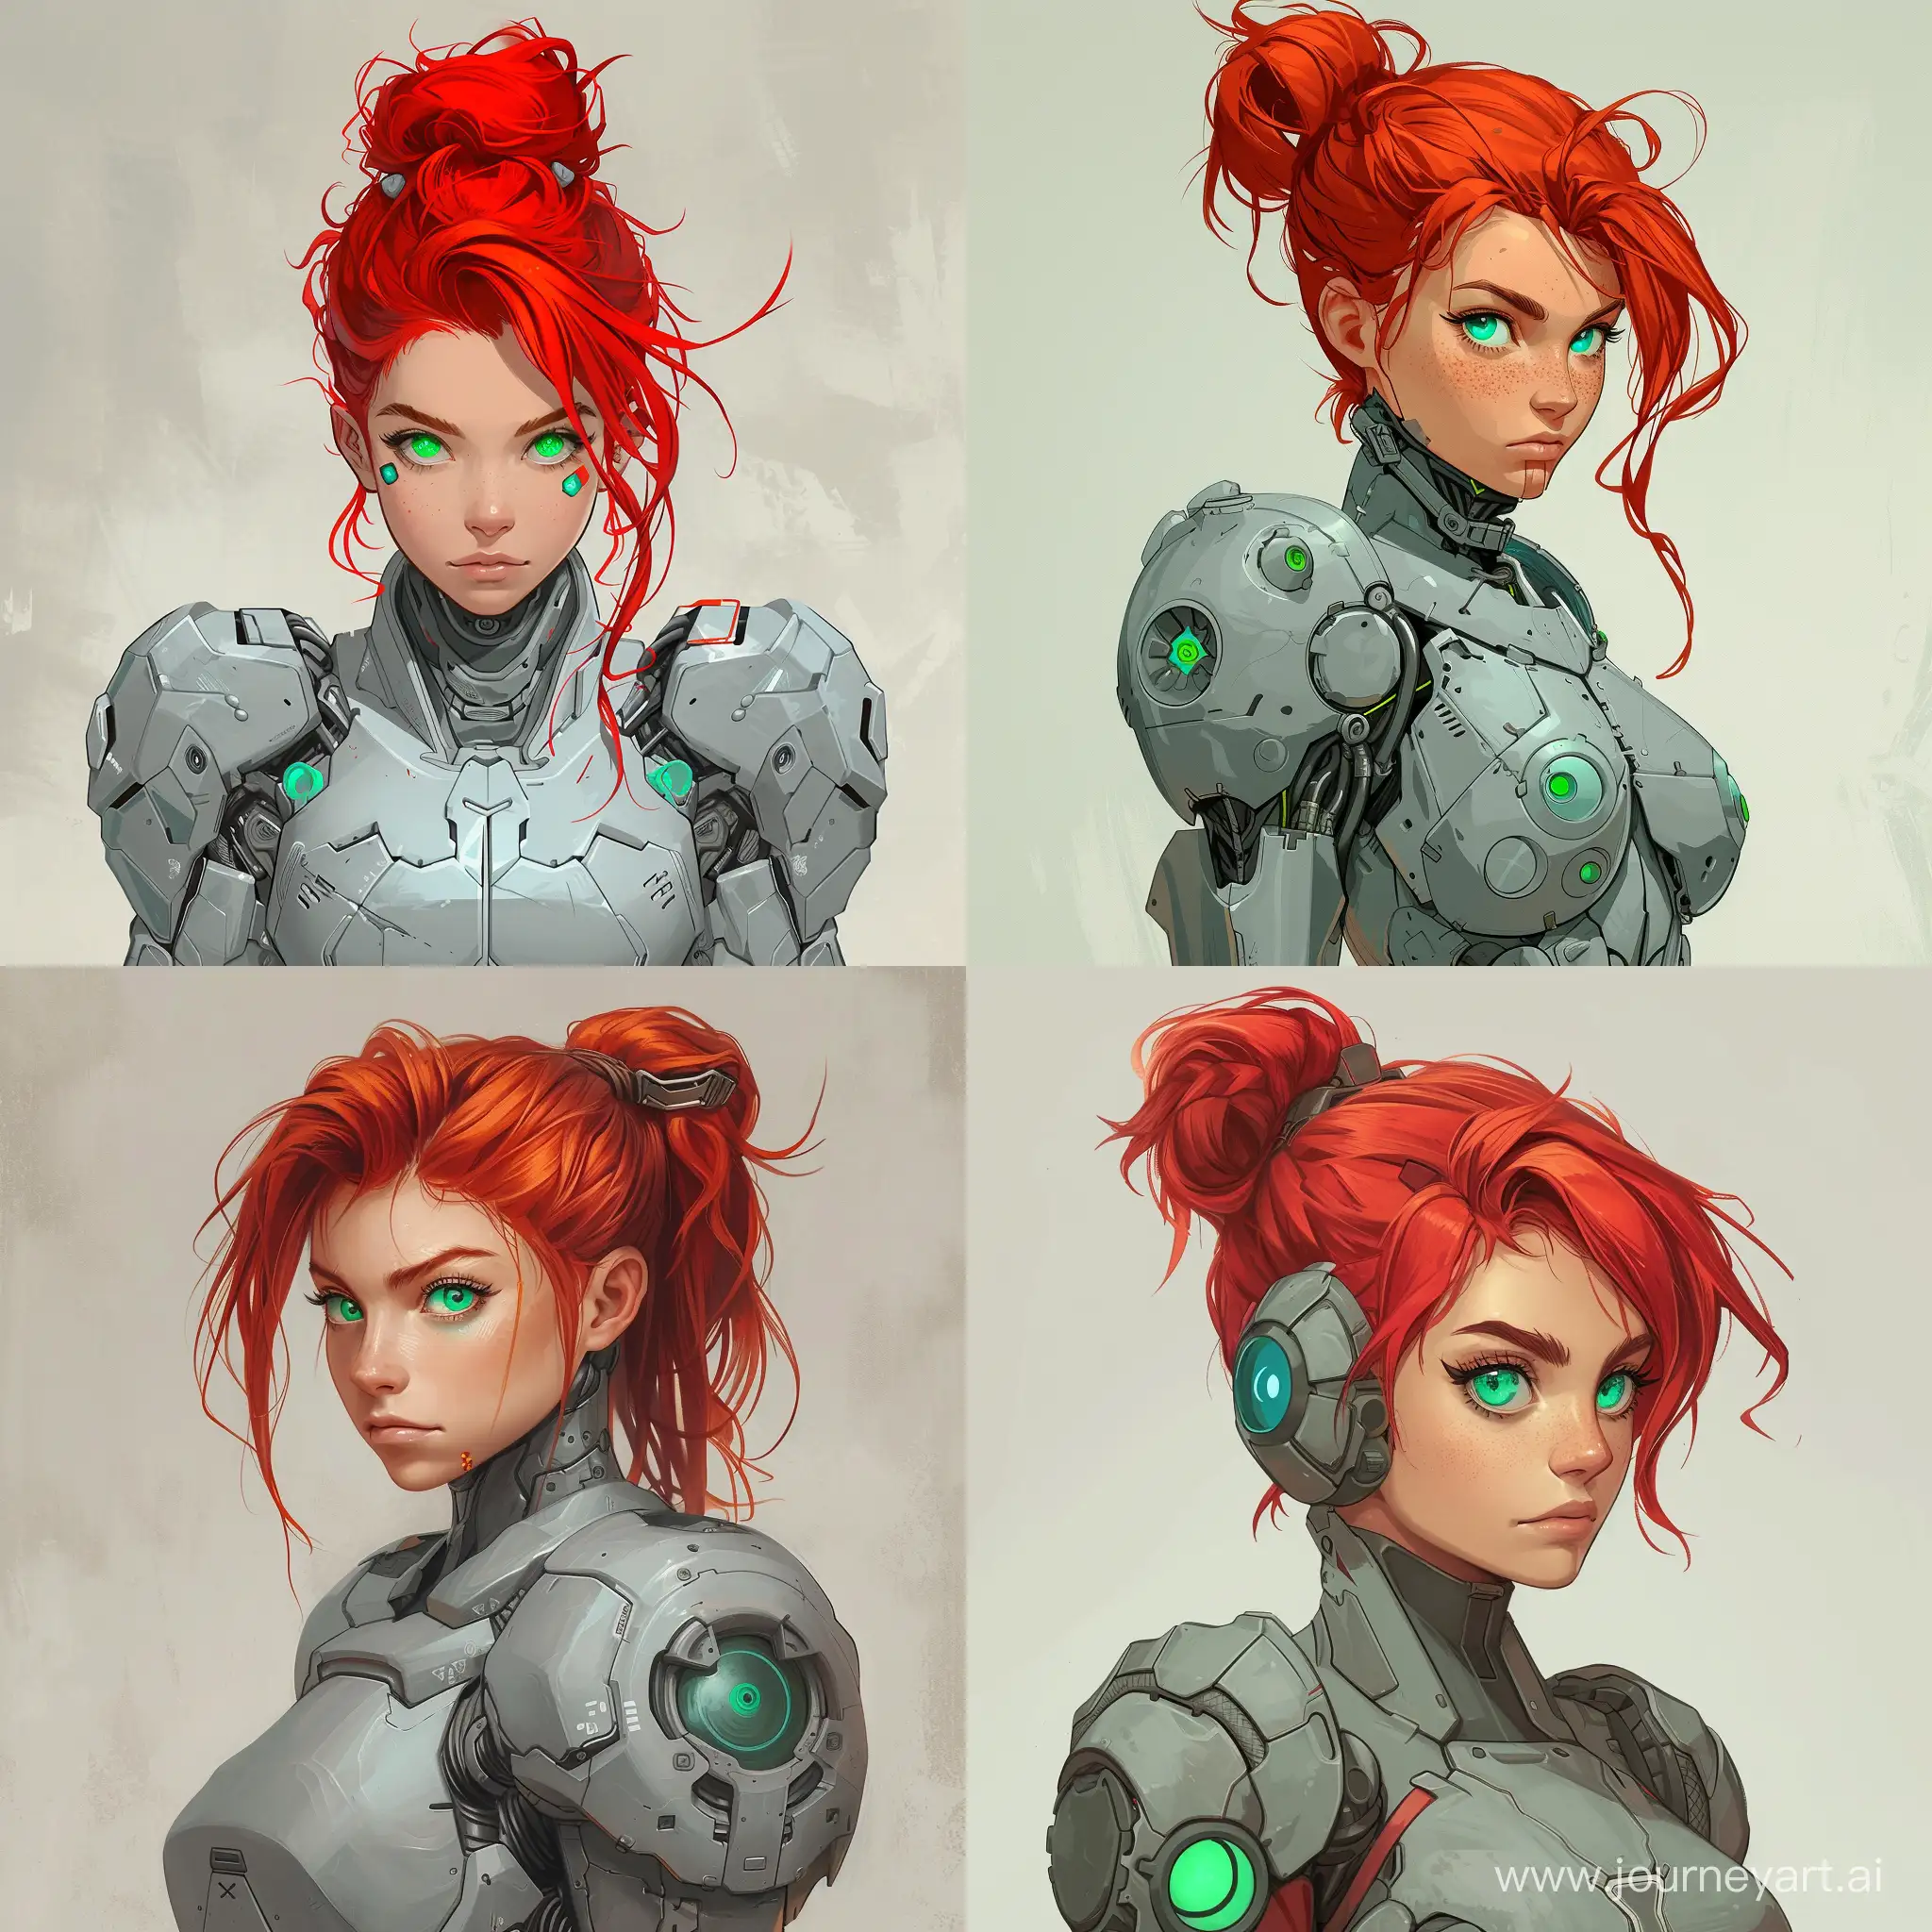 AnimeStyle-RedHaired-Girl-in-Bionic-Gray-Armor